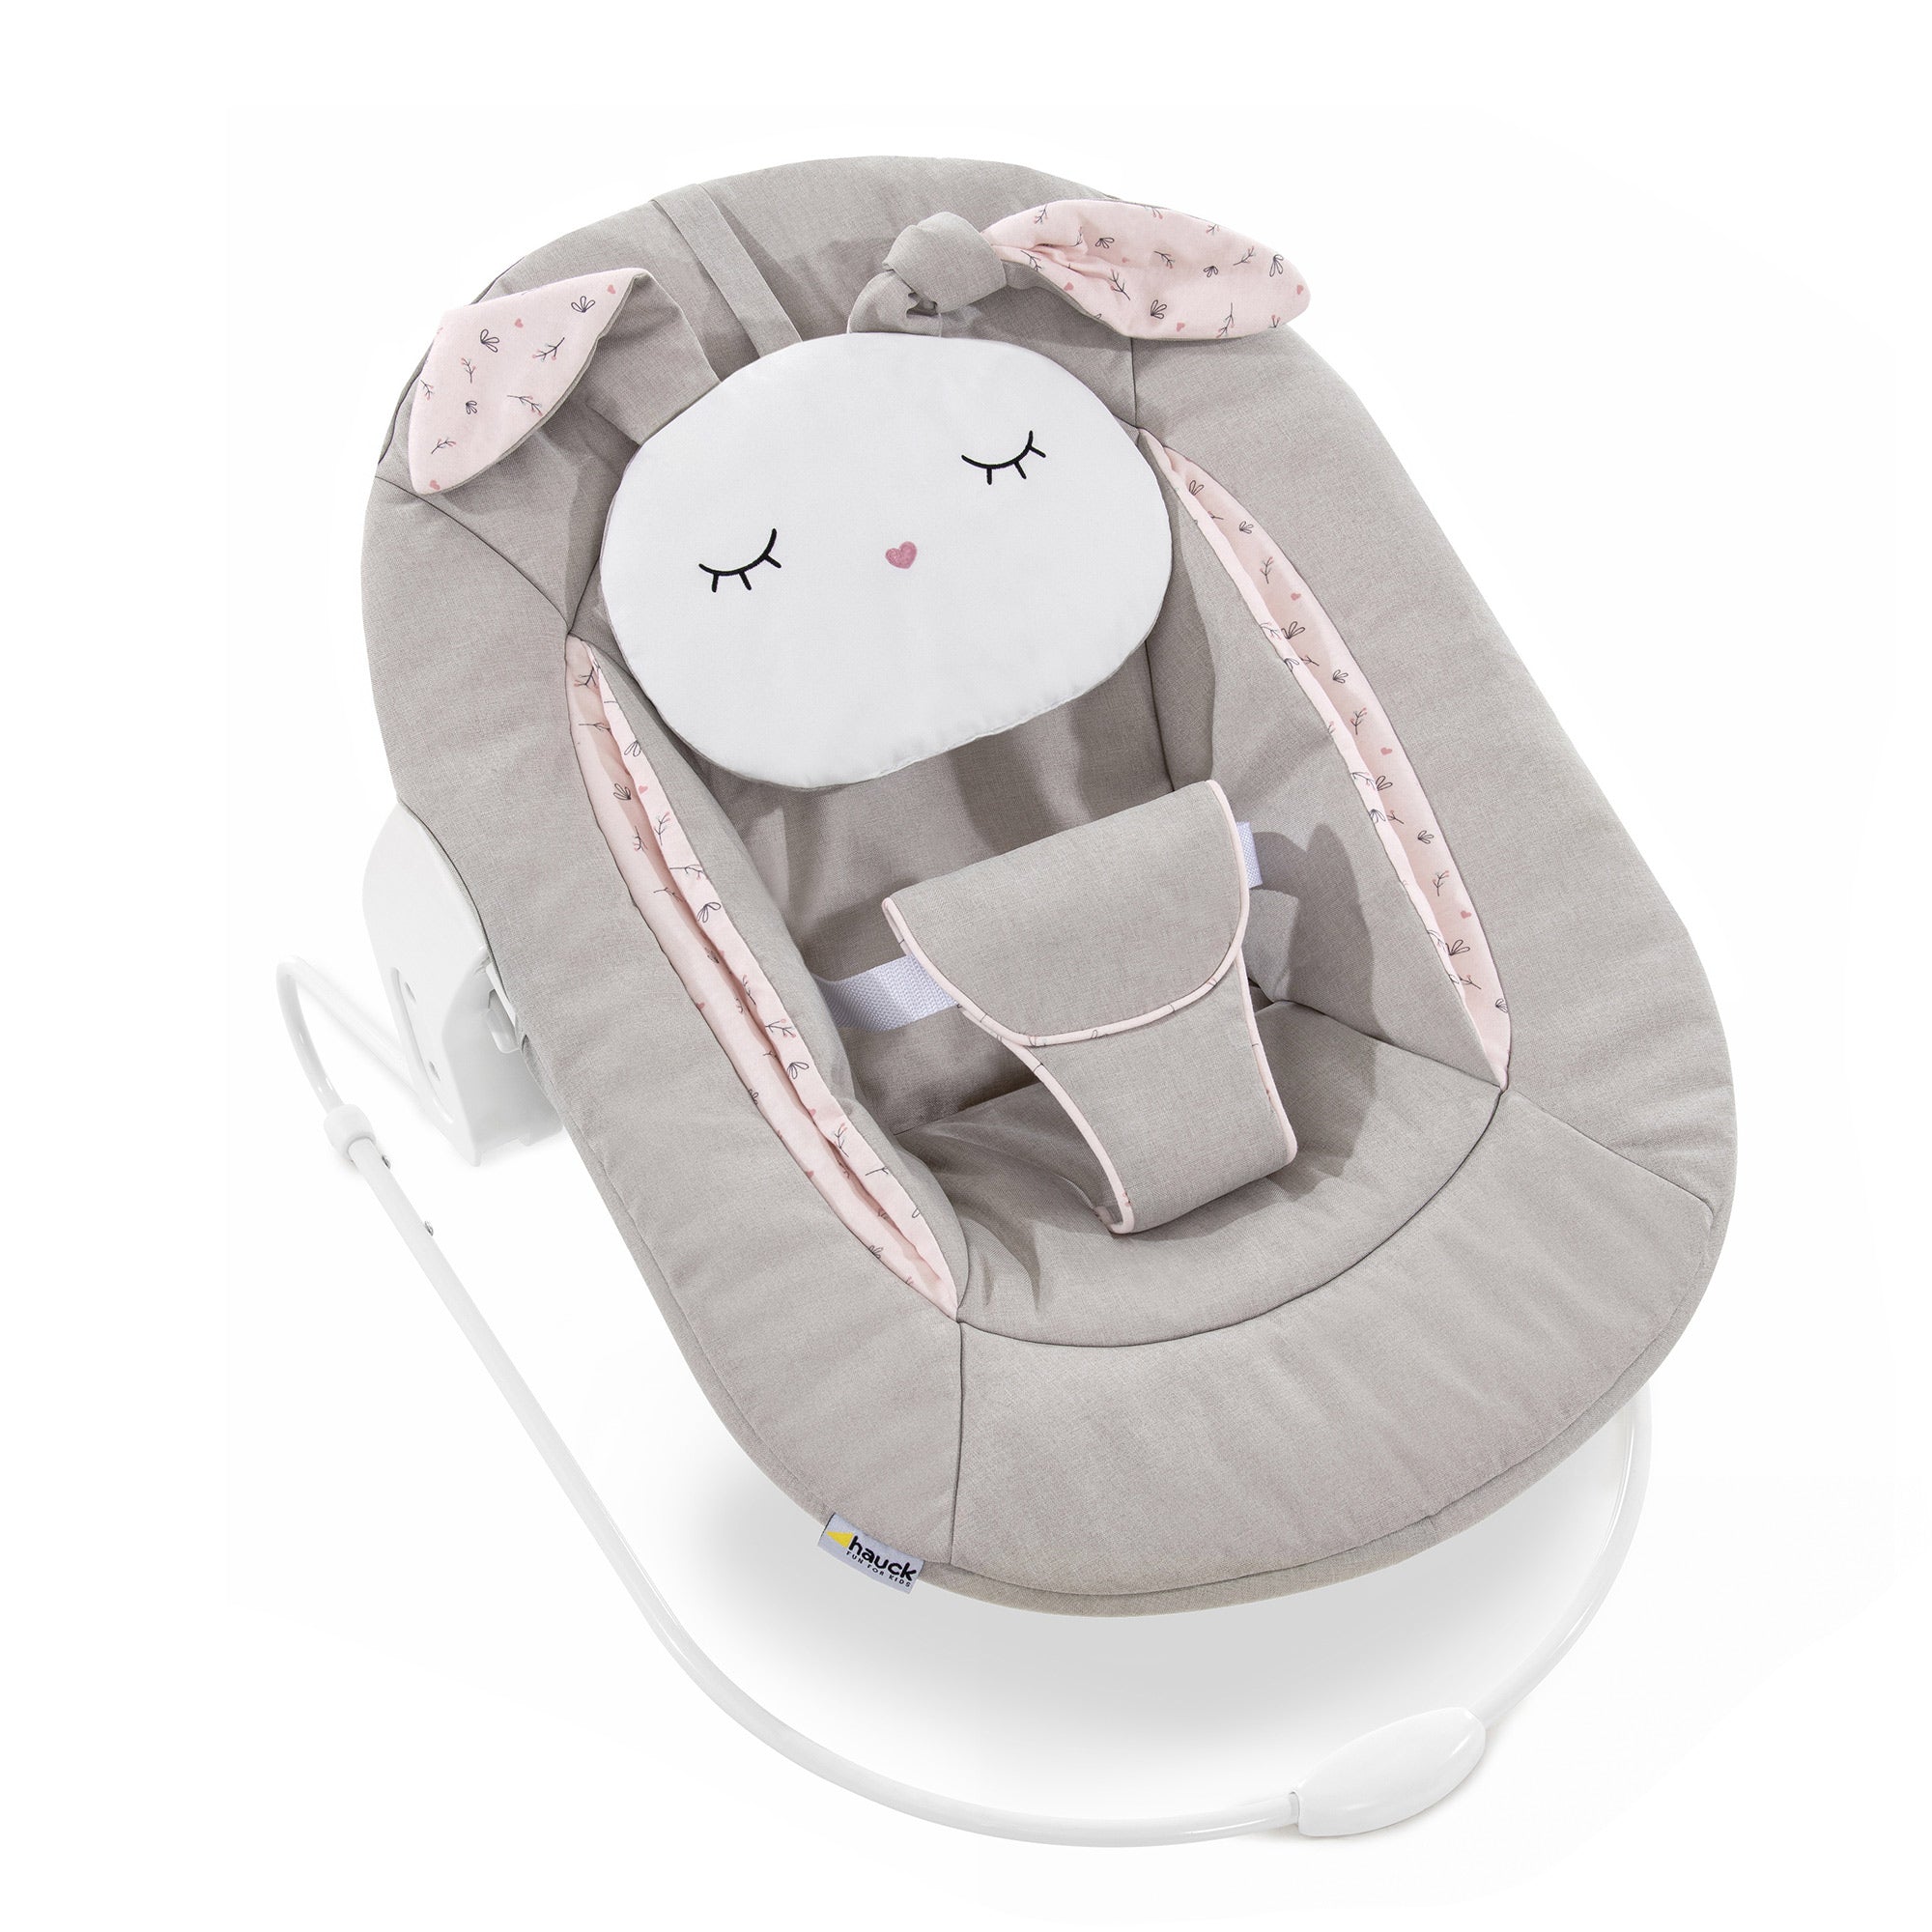 Hauck Alpha Bouncer 2in1 Rocker & Bouncer Birth to 6 months - Distressed Box